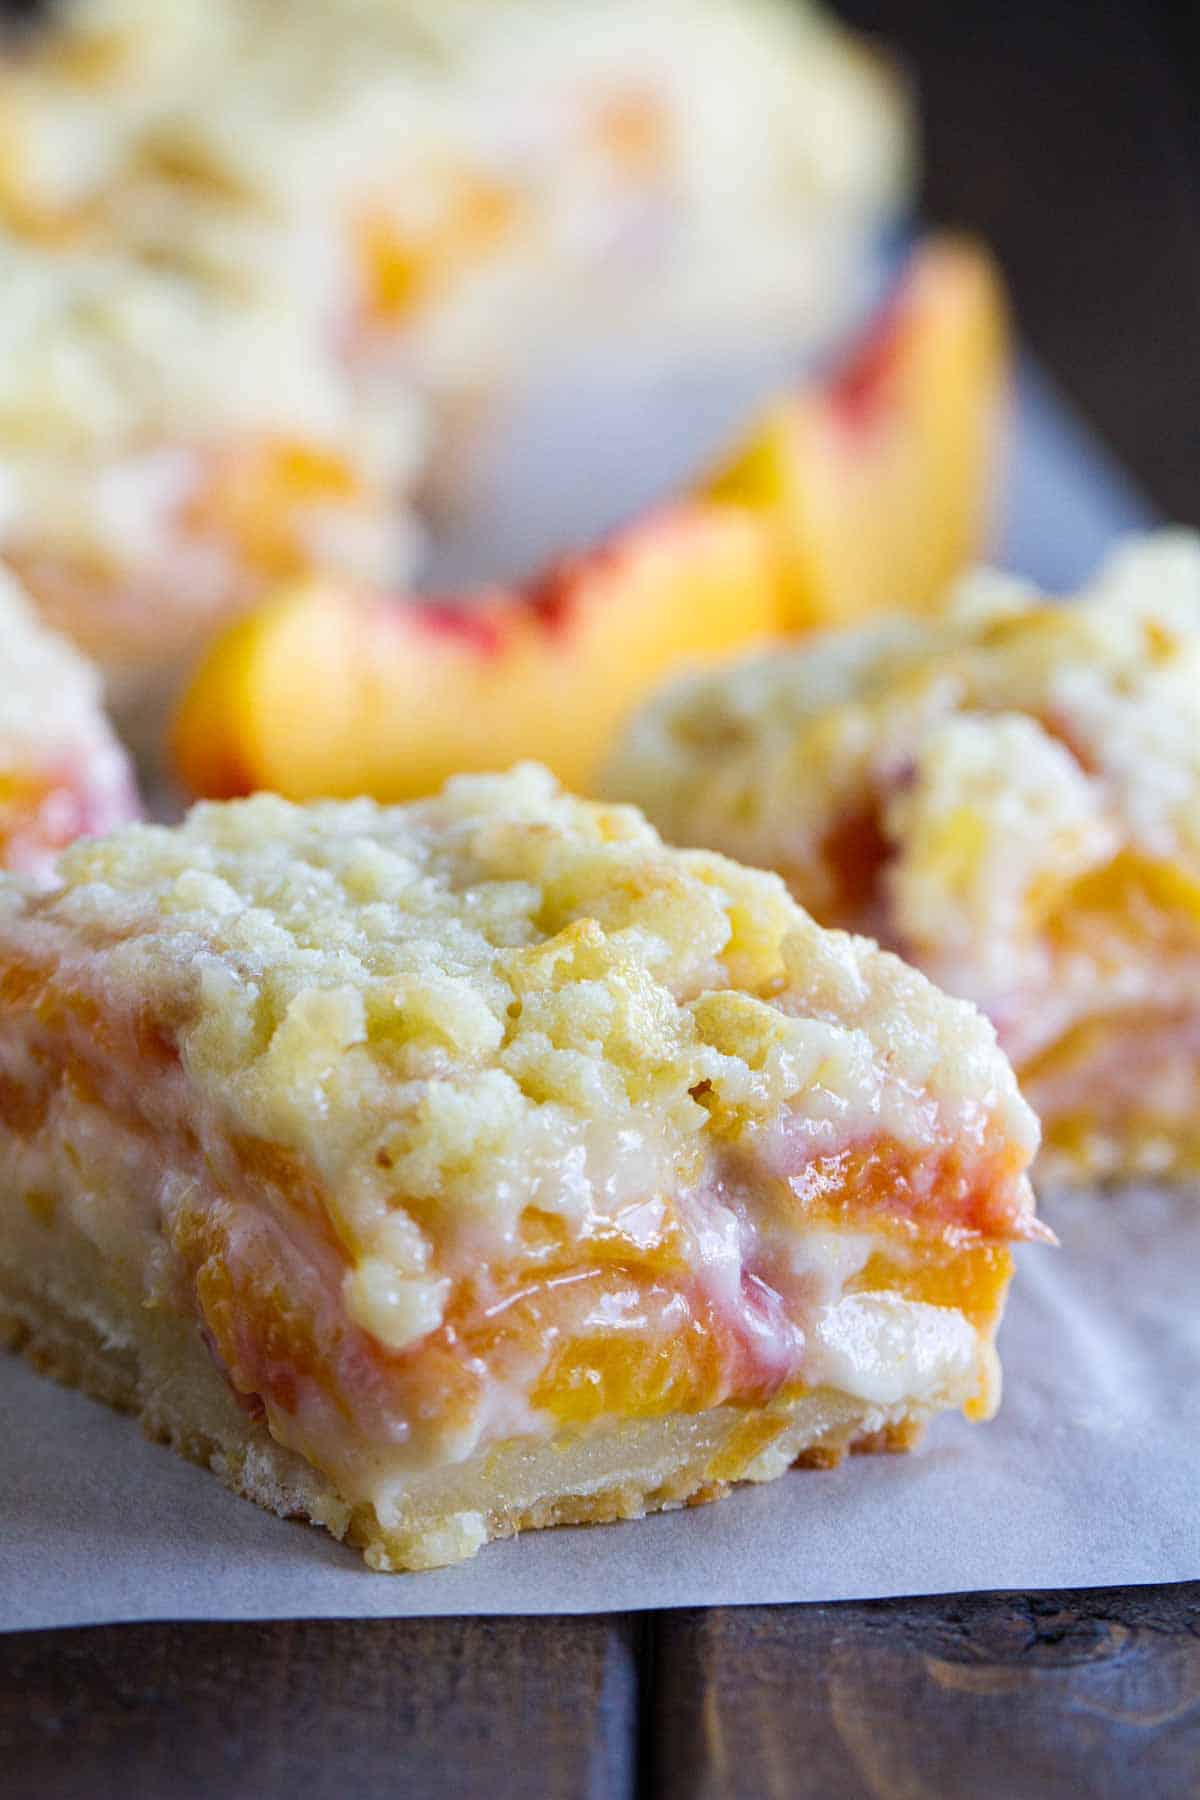 peaches and cream bar wirth crumble topping